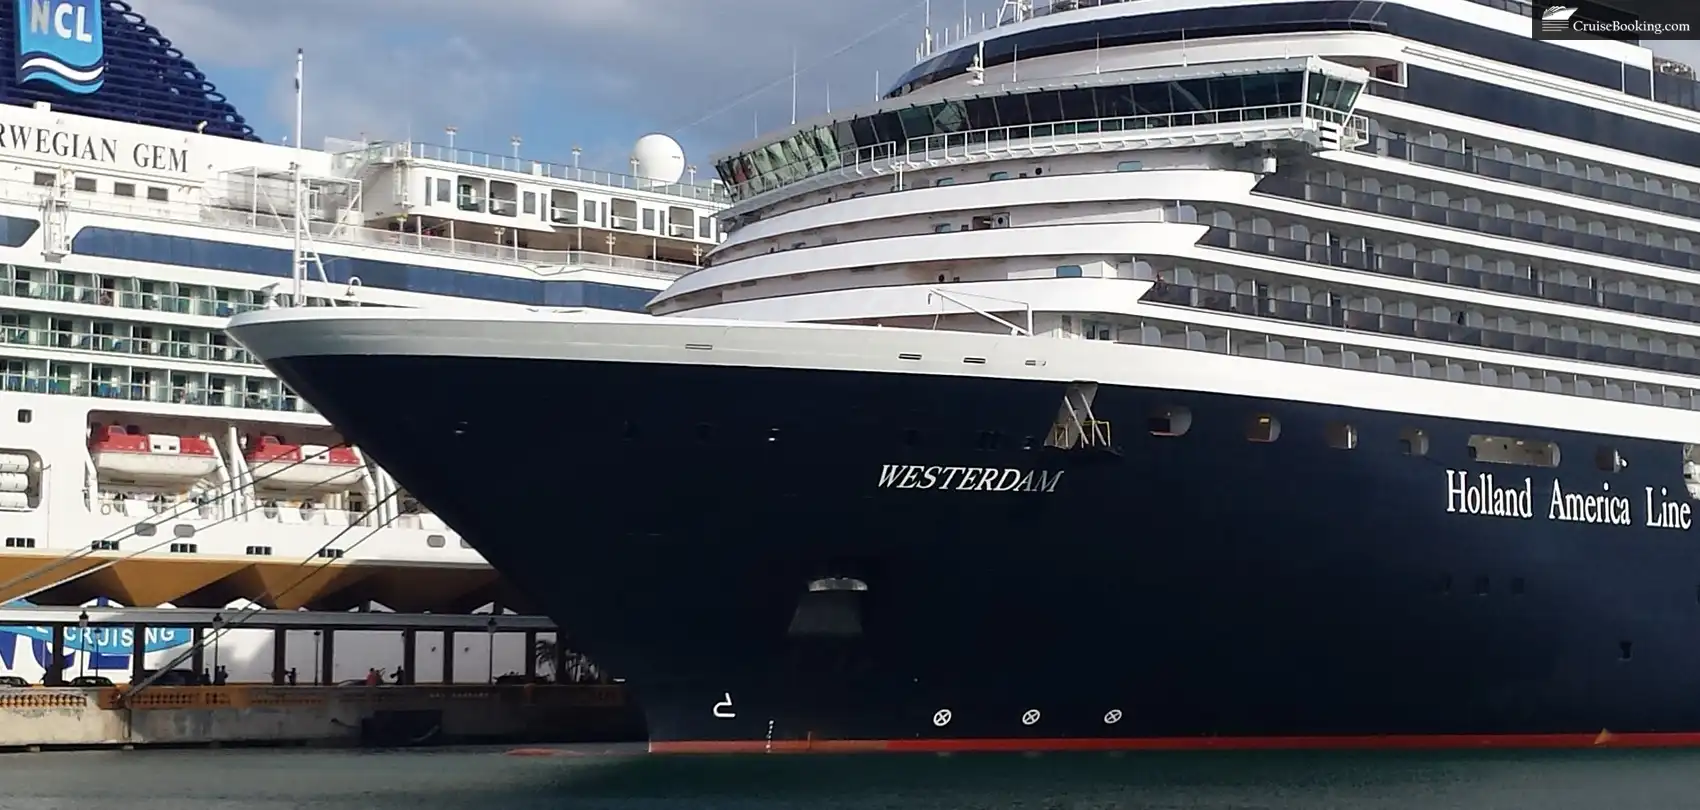 ALMACO completes the catering modernization of the Westerdam